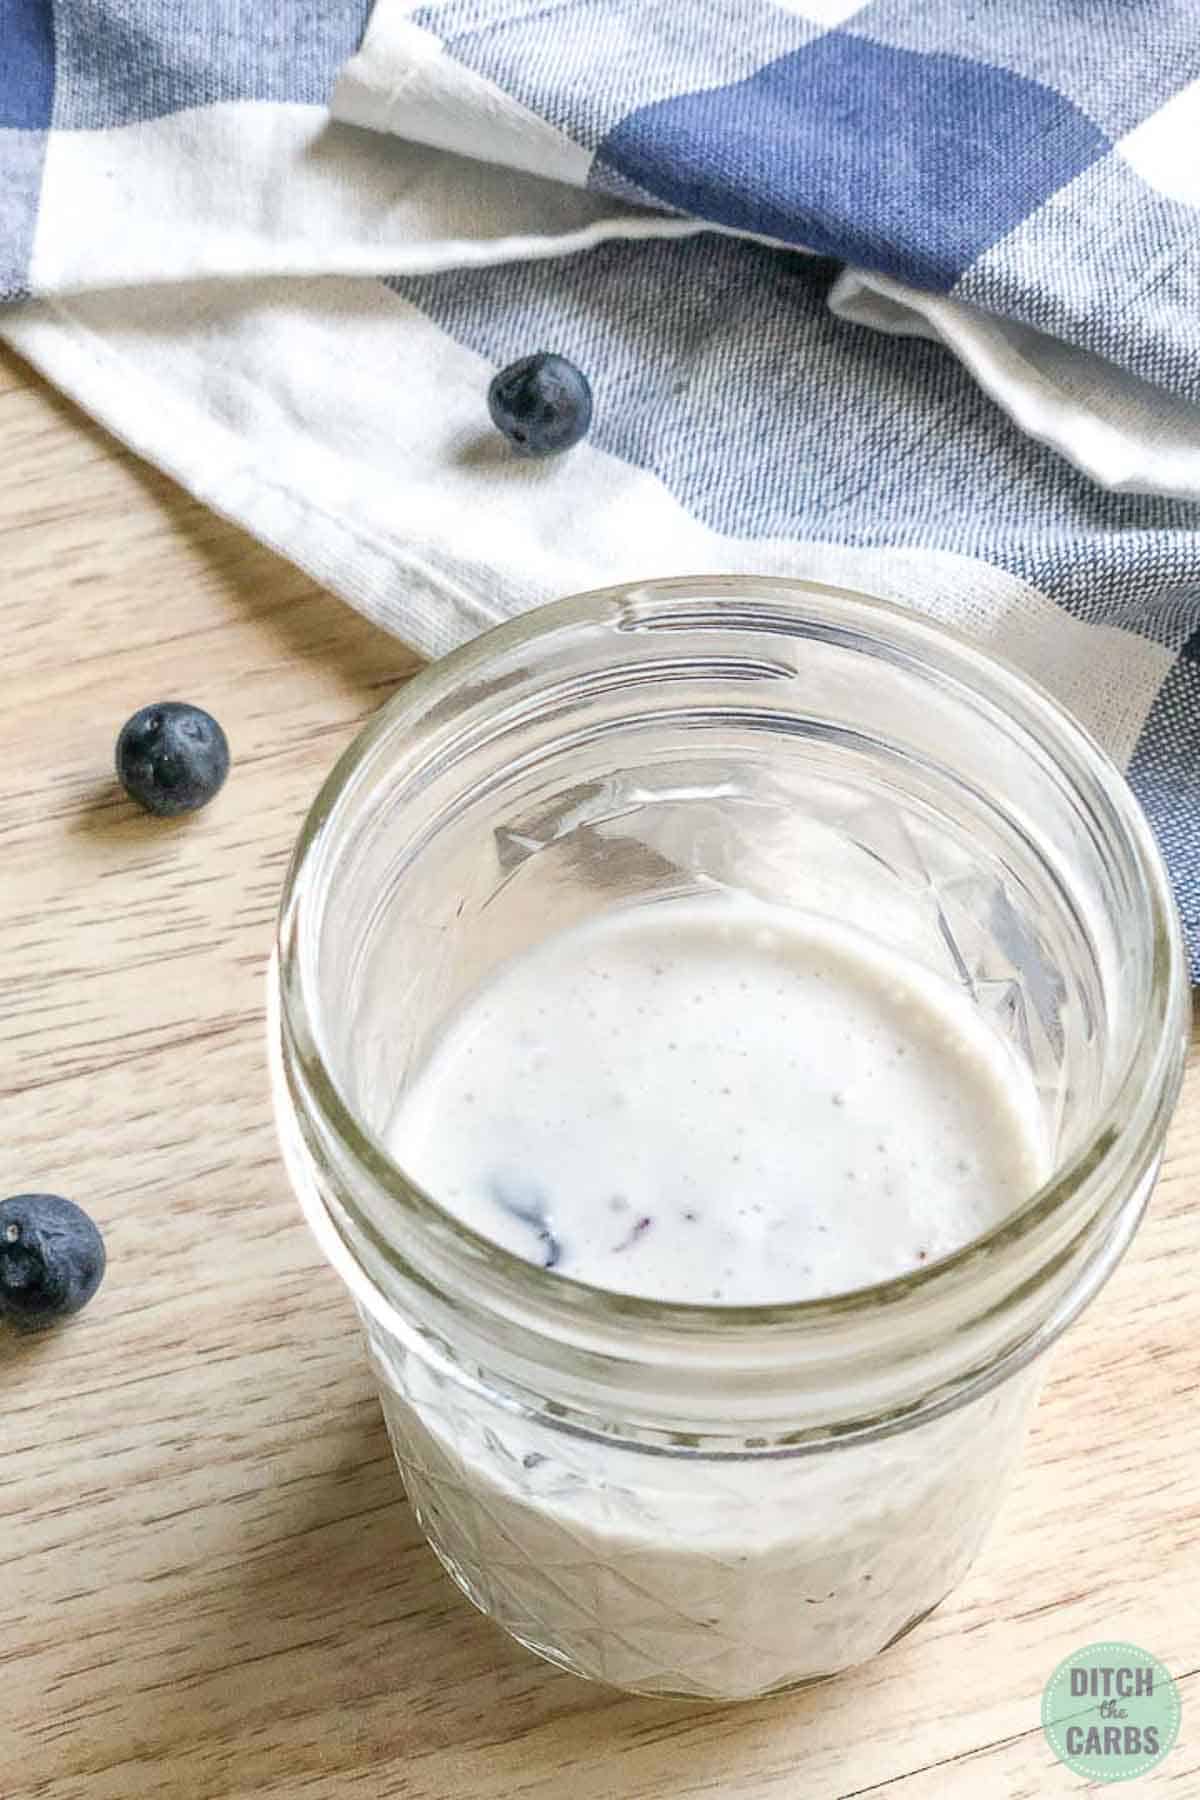 Blueberry have been smashed into the base mug cheesecake batter to make blueberry flavored cheesecake in a clear glass jar.